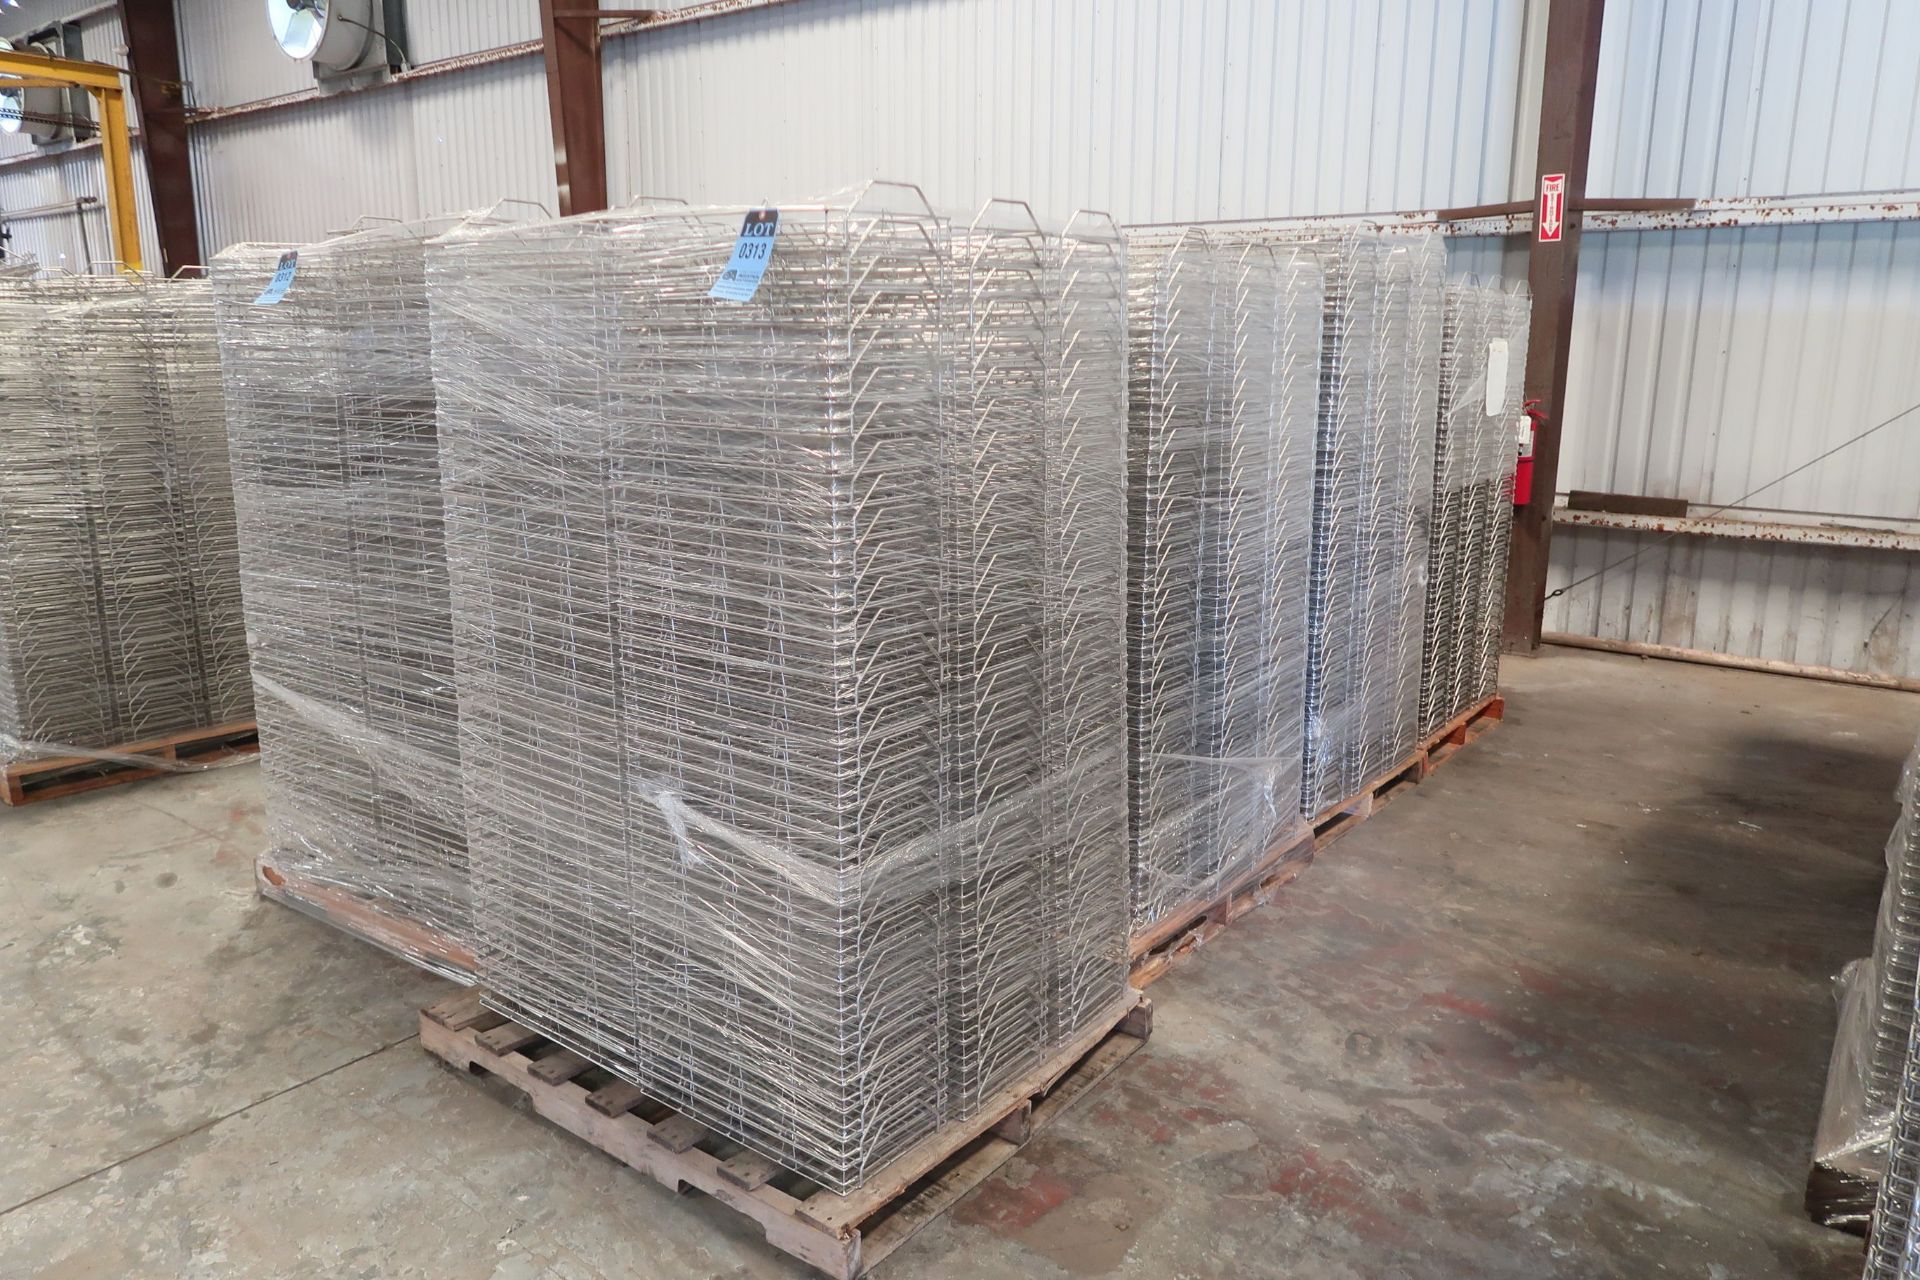 (LOT) (4) SKIDS, 12" X 22" X 2" D STAINLESS WIRE PART TRAYS, APPROX. (170) PER SKID, APPROX. (680)